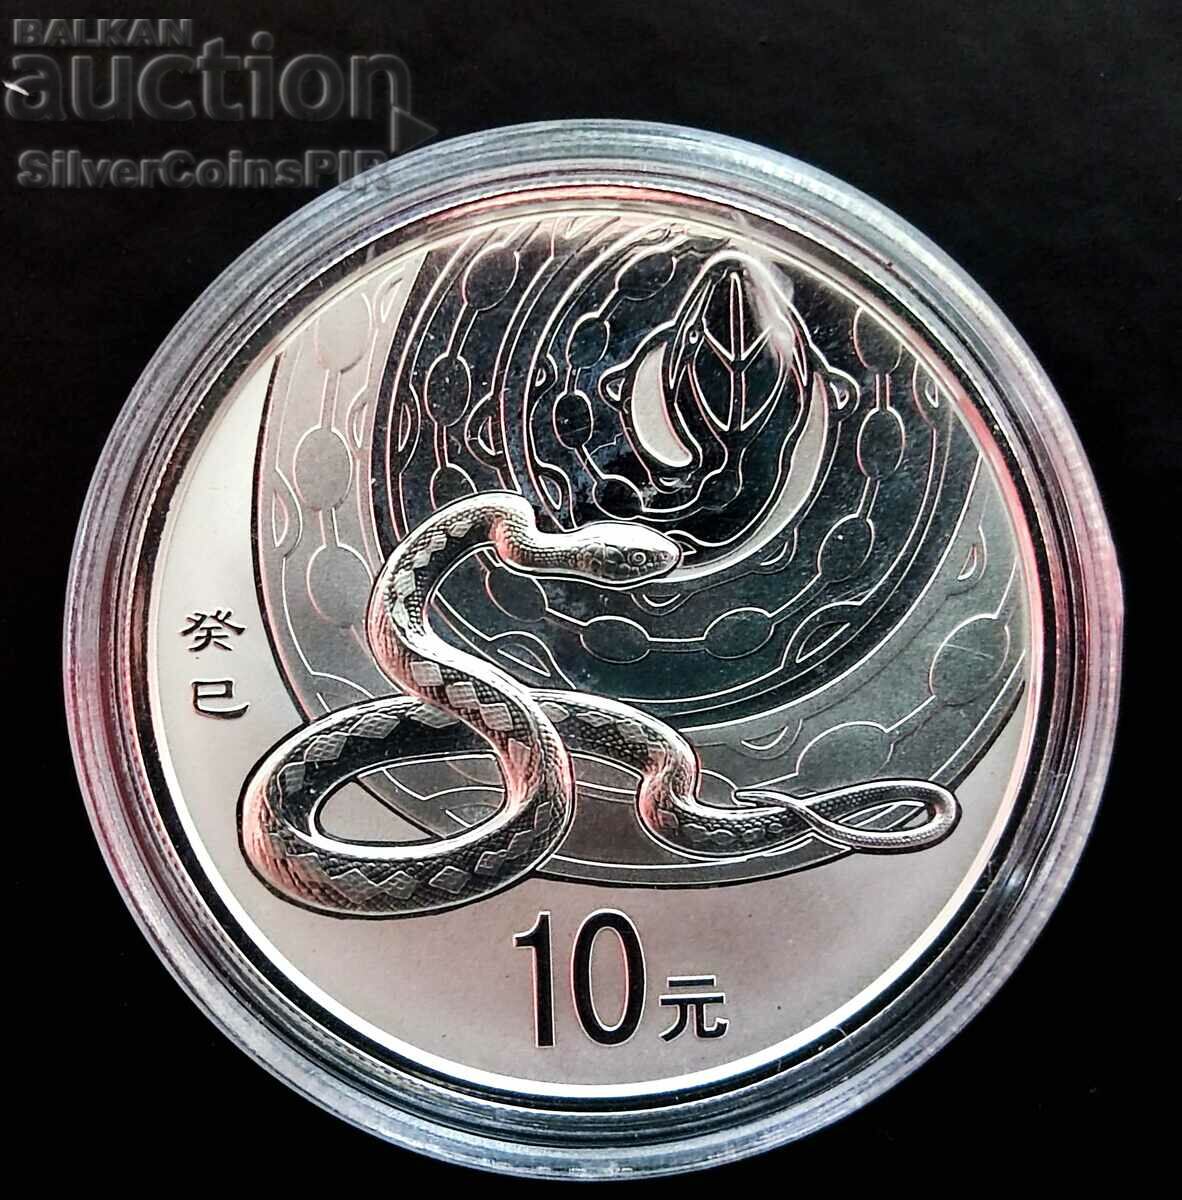 Silver 1 oz Year of the Snake 2013 Lunar China